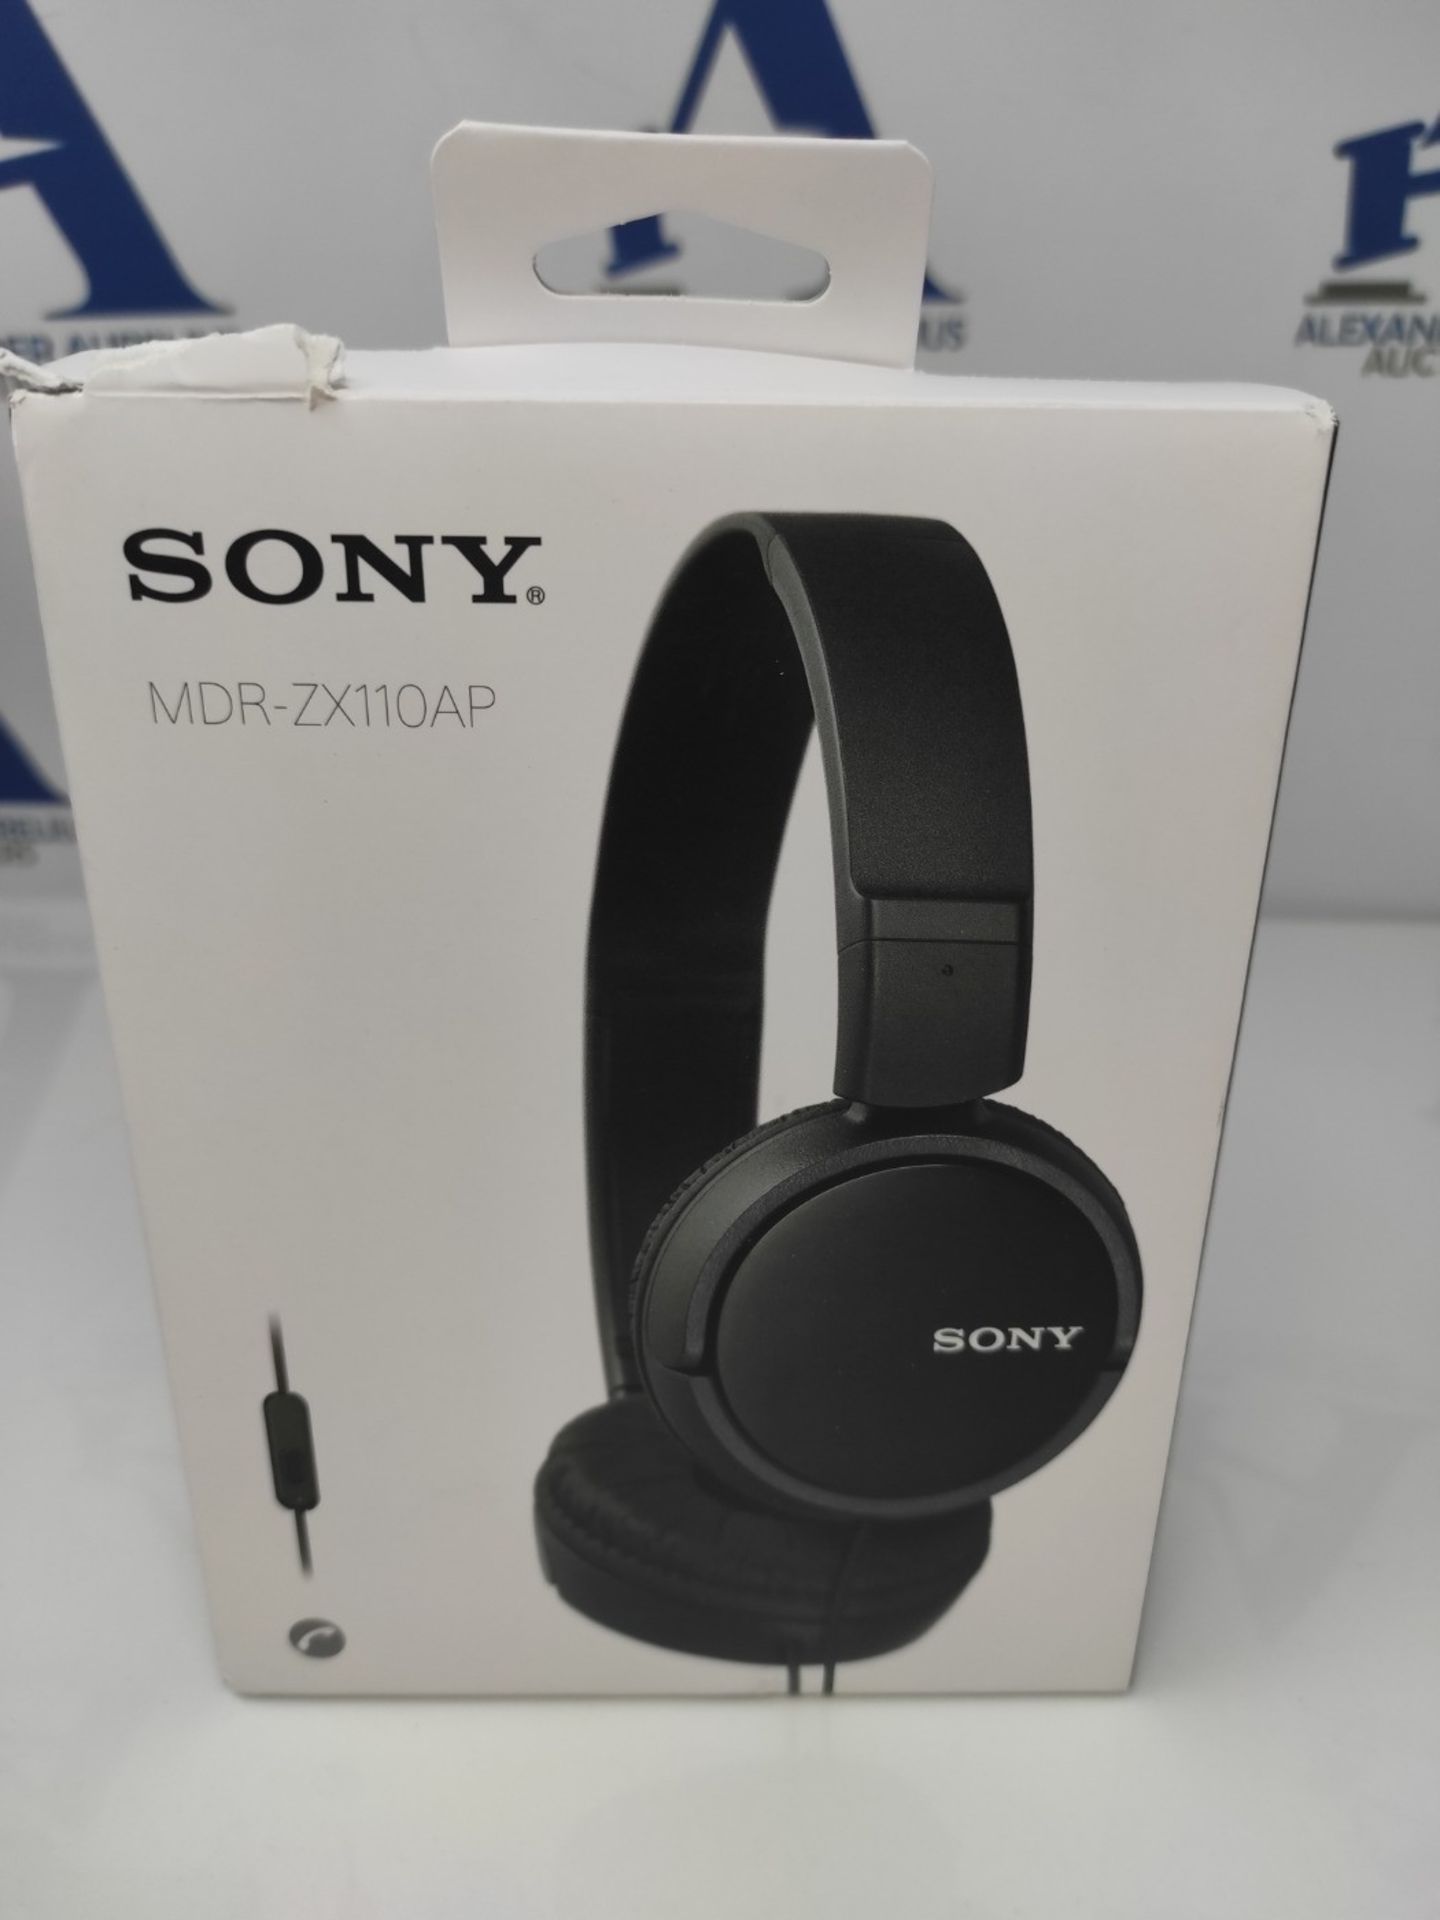 Sony MDR-ZX110AP - On-ear headphones with microphone, Black - Image 2 of 3